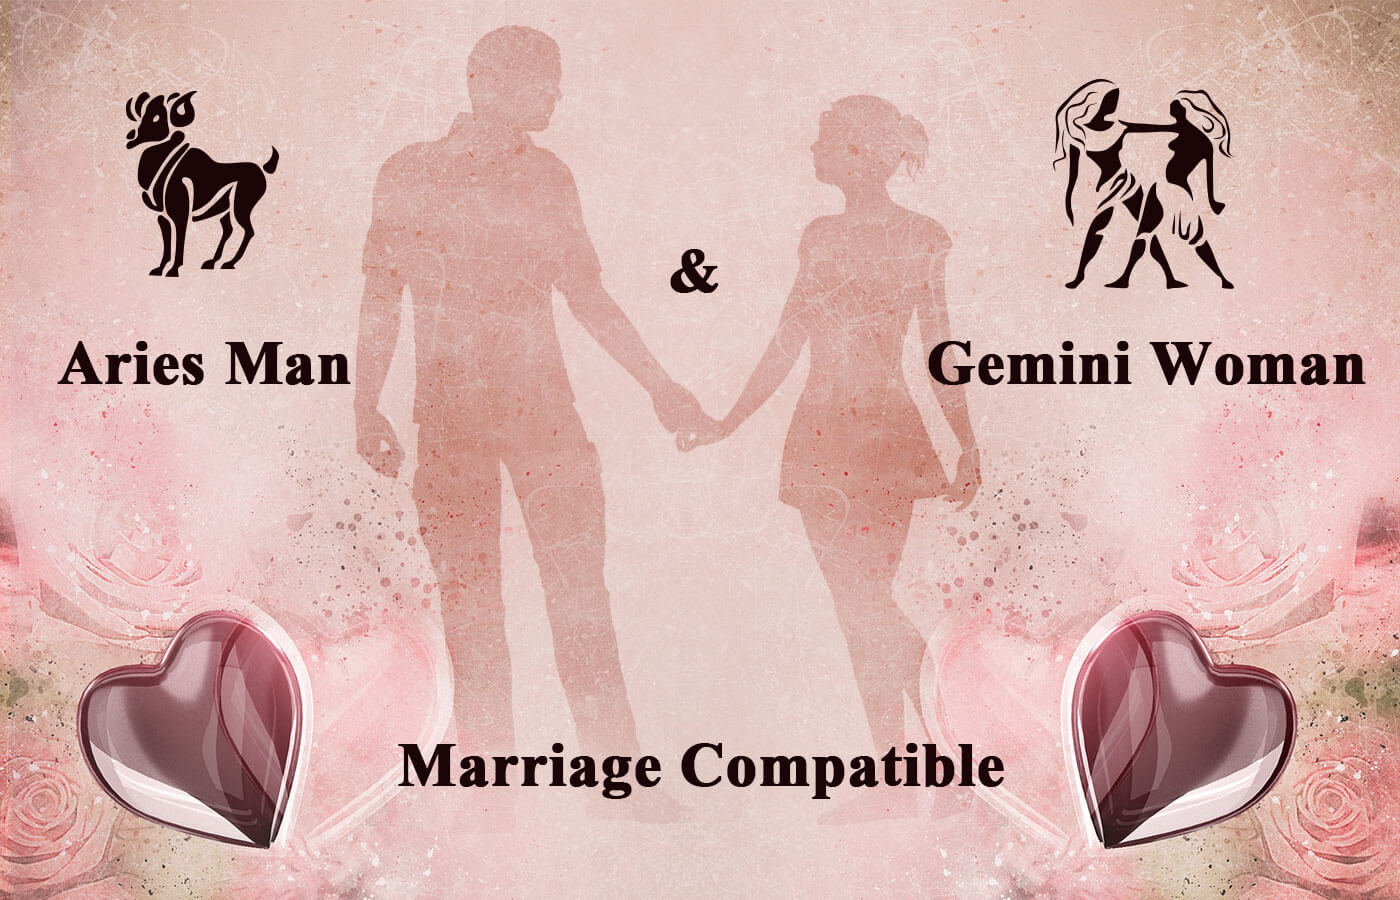 How-compatible-are-Aries-Man-and-Gemini-Woman-for-marriage-in-As.jpg